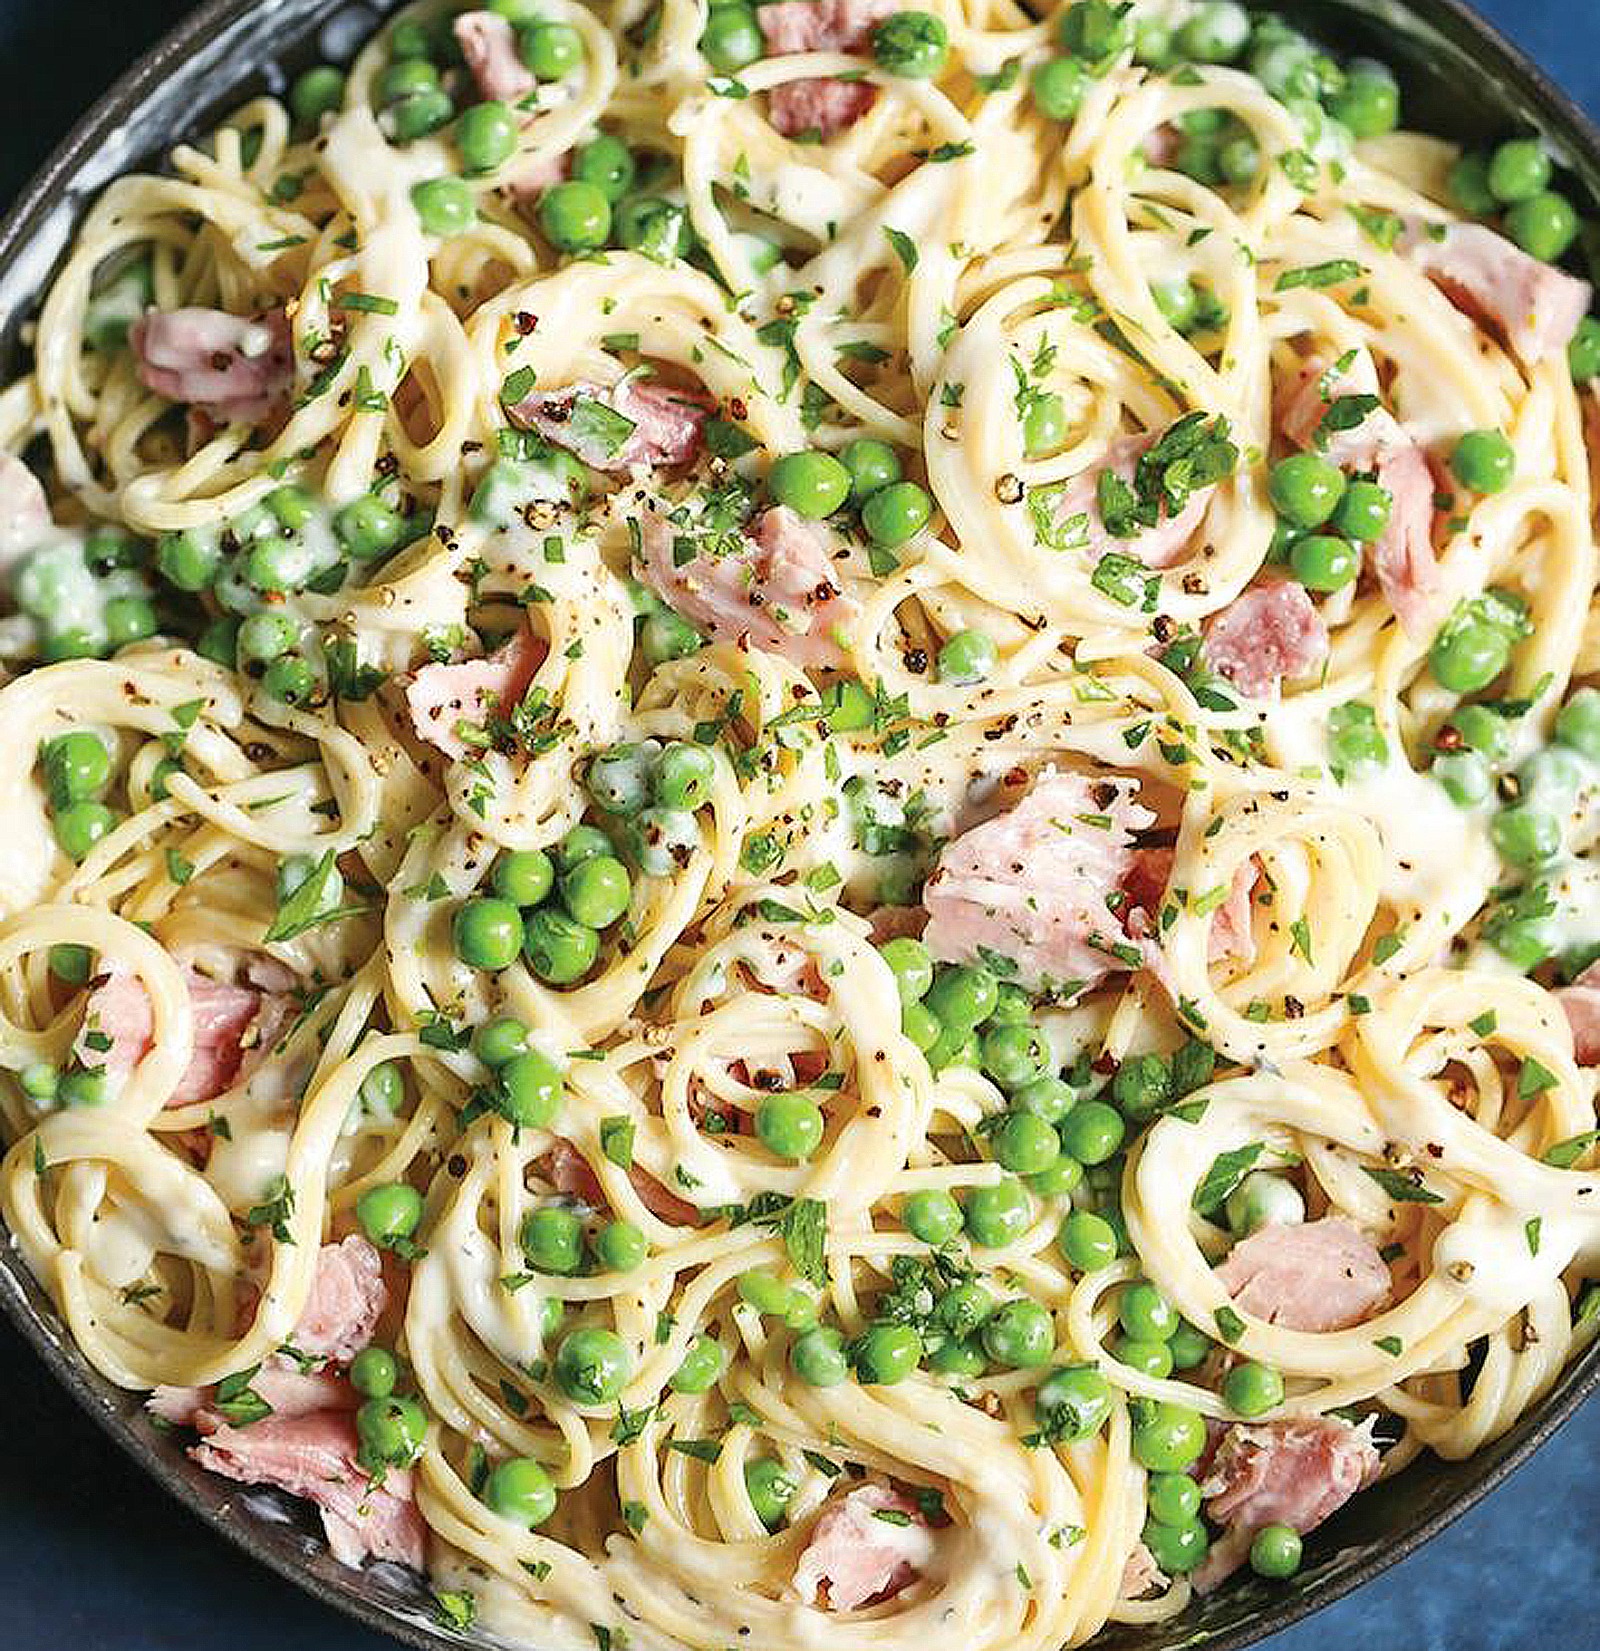 Carlton Farms on Twitter: "Perfect for ham. Sophisticated, and yummy! Fettuccine Alfredo with Ham and Peas. See recipe link. https://t.co/8IKcJuRRzq" / Twitter